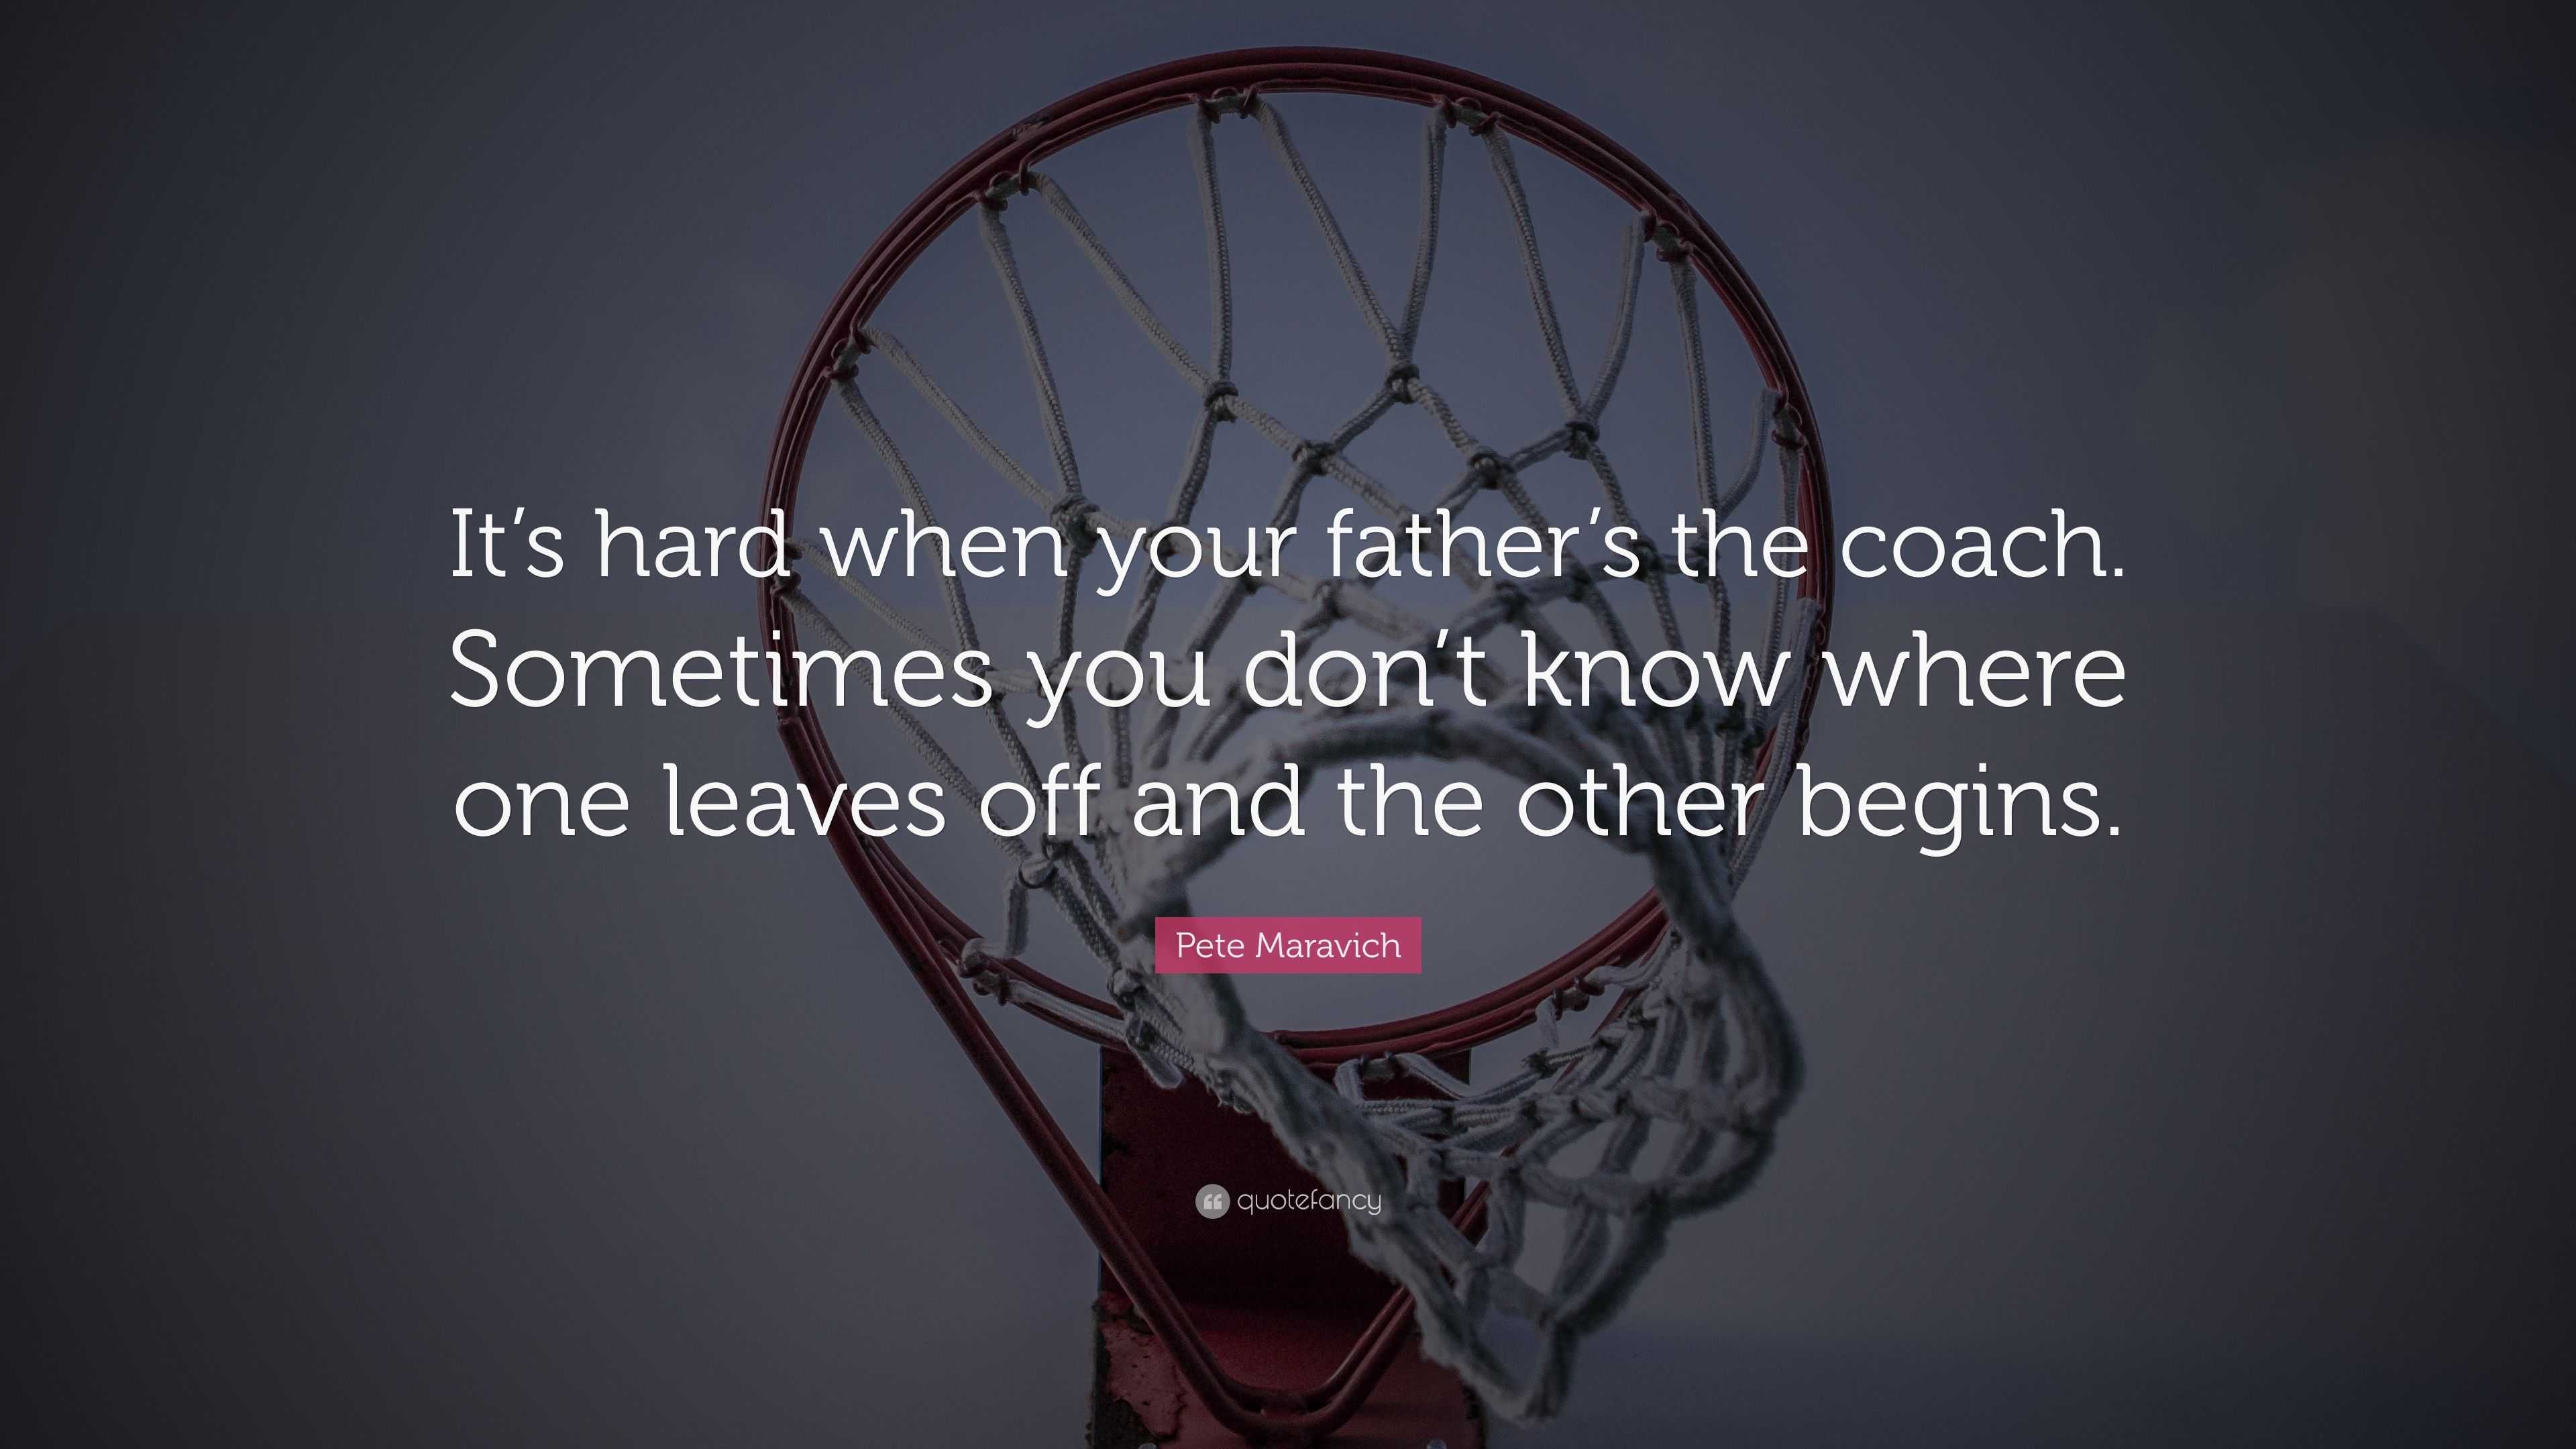 Pete Maravich Quote: “It’s hard when your father’s the coach. Sometimes ...